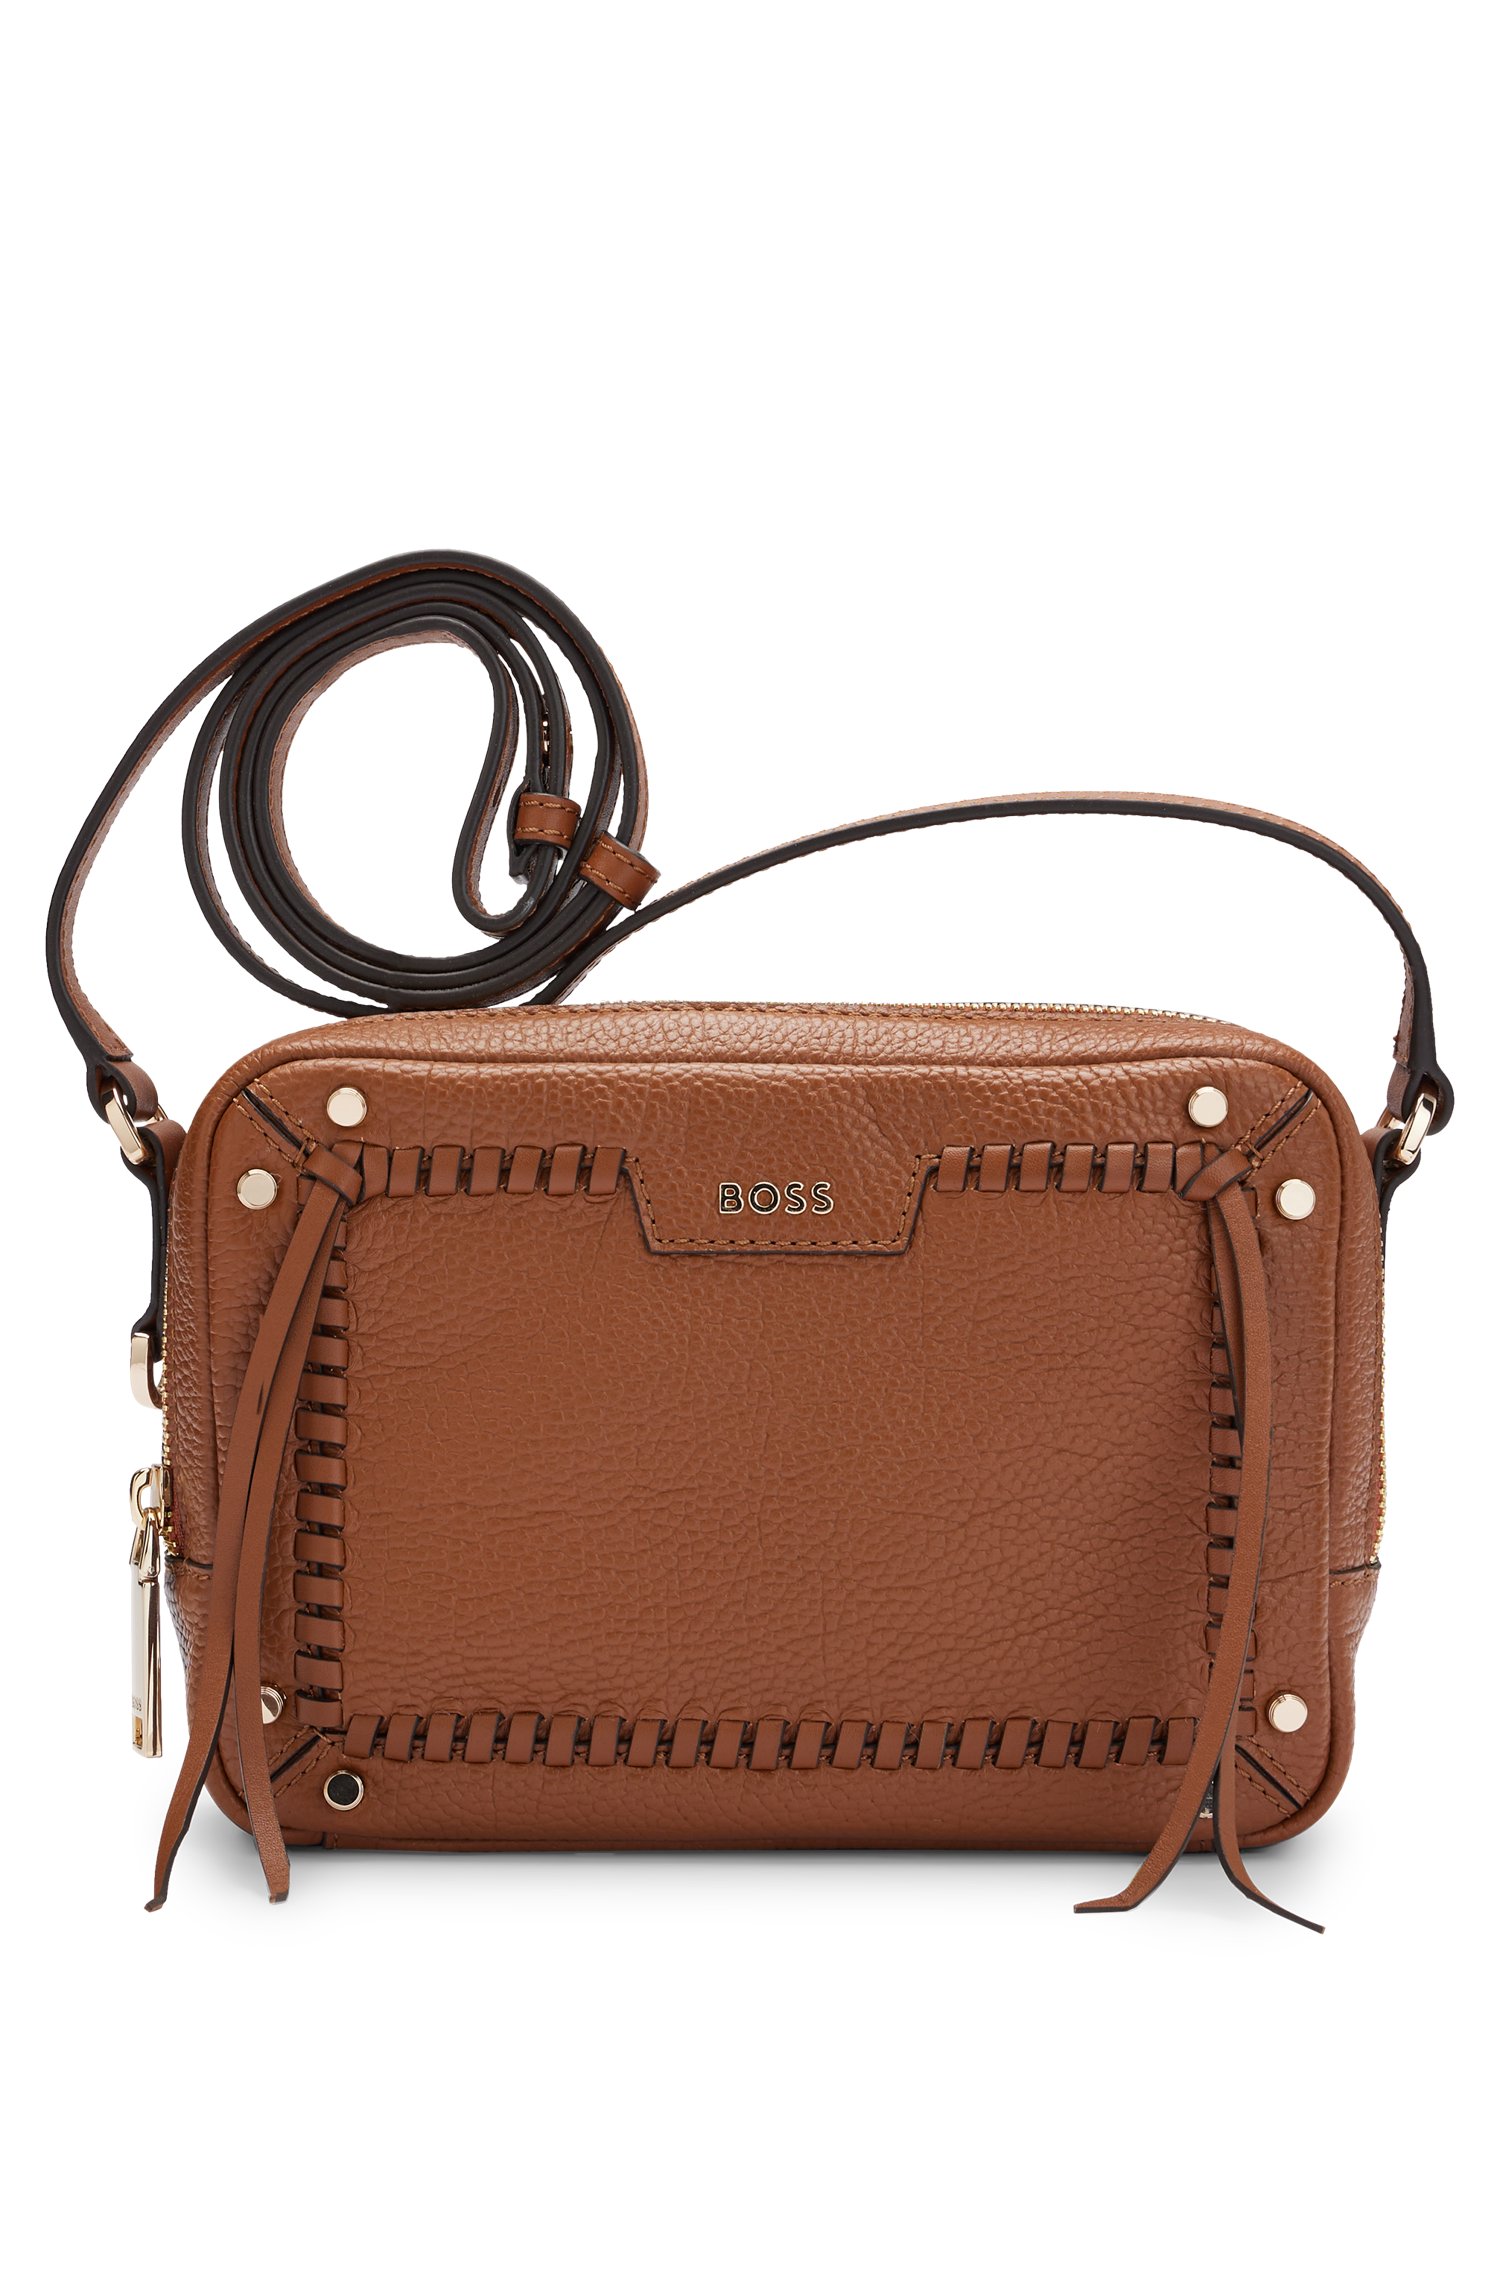 Grained-leather crossbody bag with whipstitch details